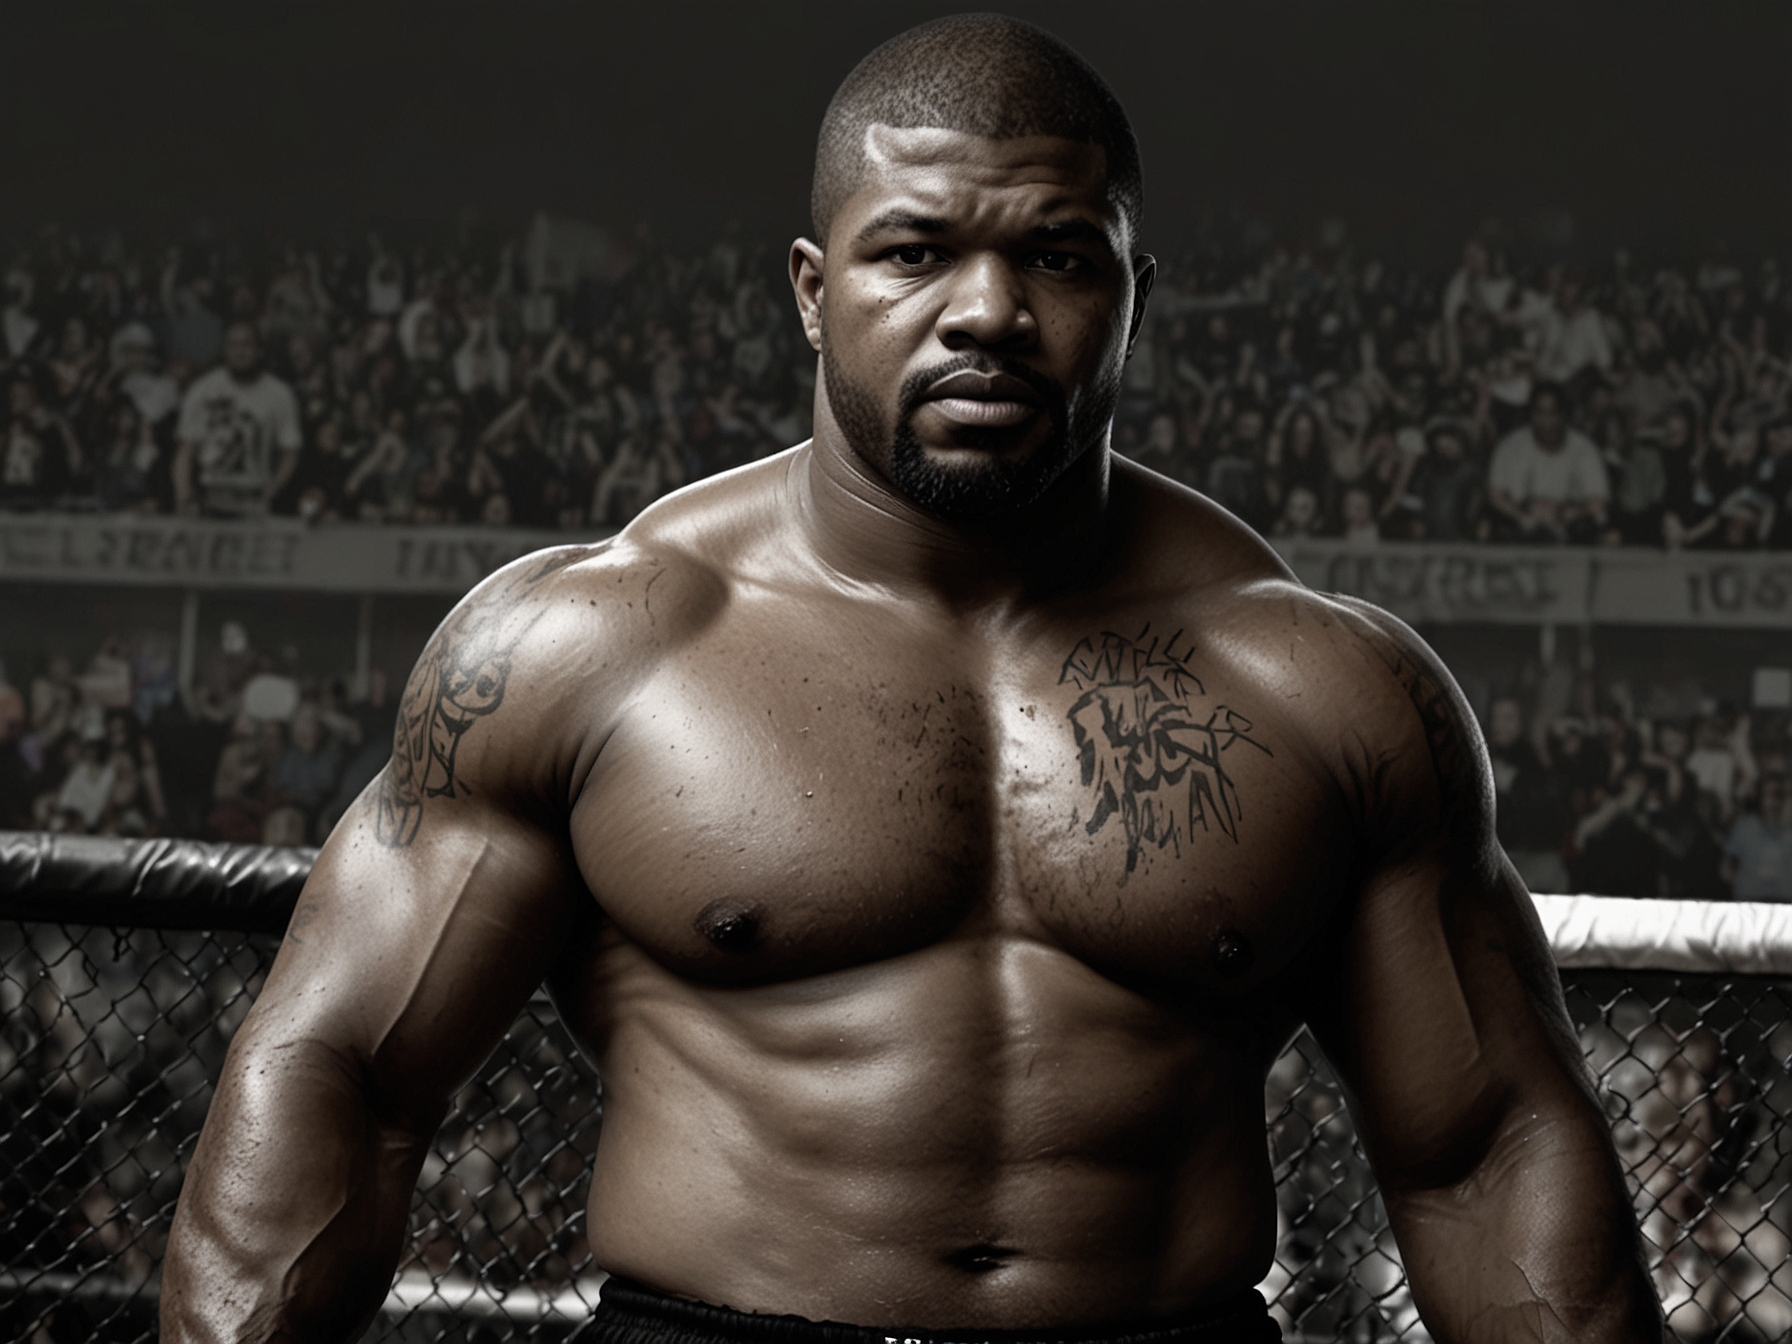 Rampage Jackson sharing anecdotes from his legendary career. The image highlights his charismatic personality and his transition from MMA fighter to actor.